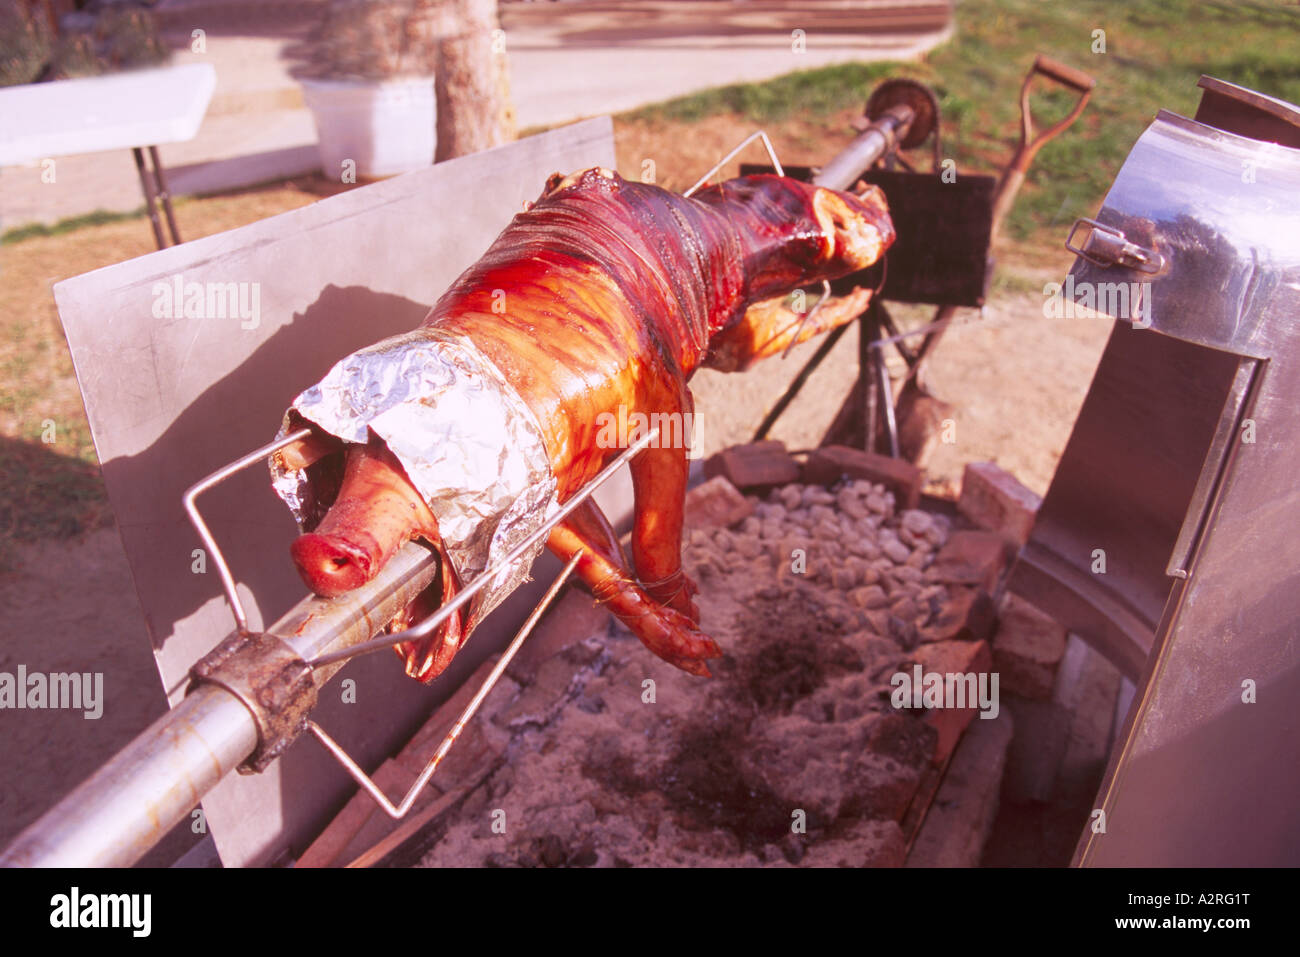 Pig Roast - Hog skewered on a Rotisserie Spit and rotating and roasting over an Open Fire Pit Stock Photo